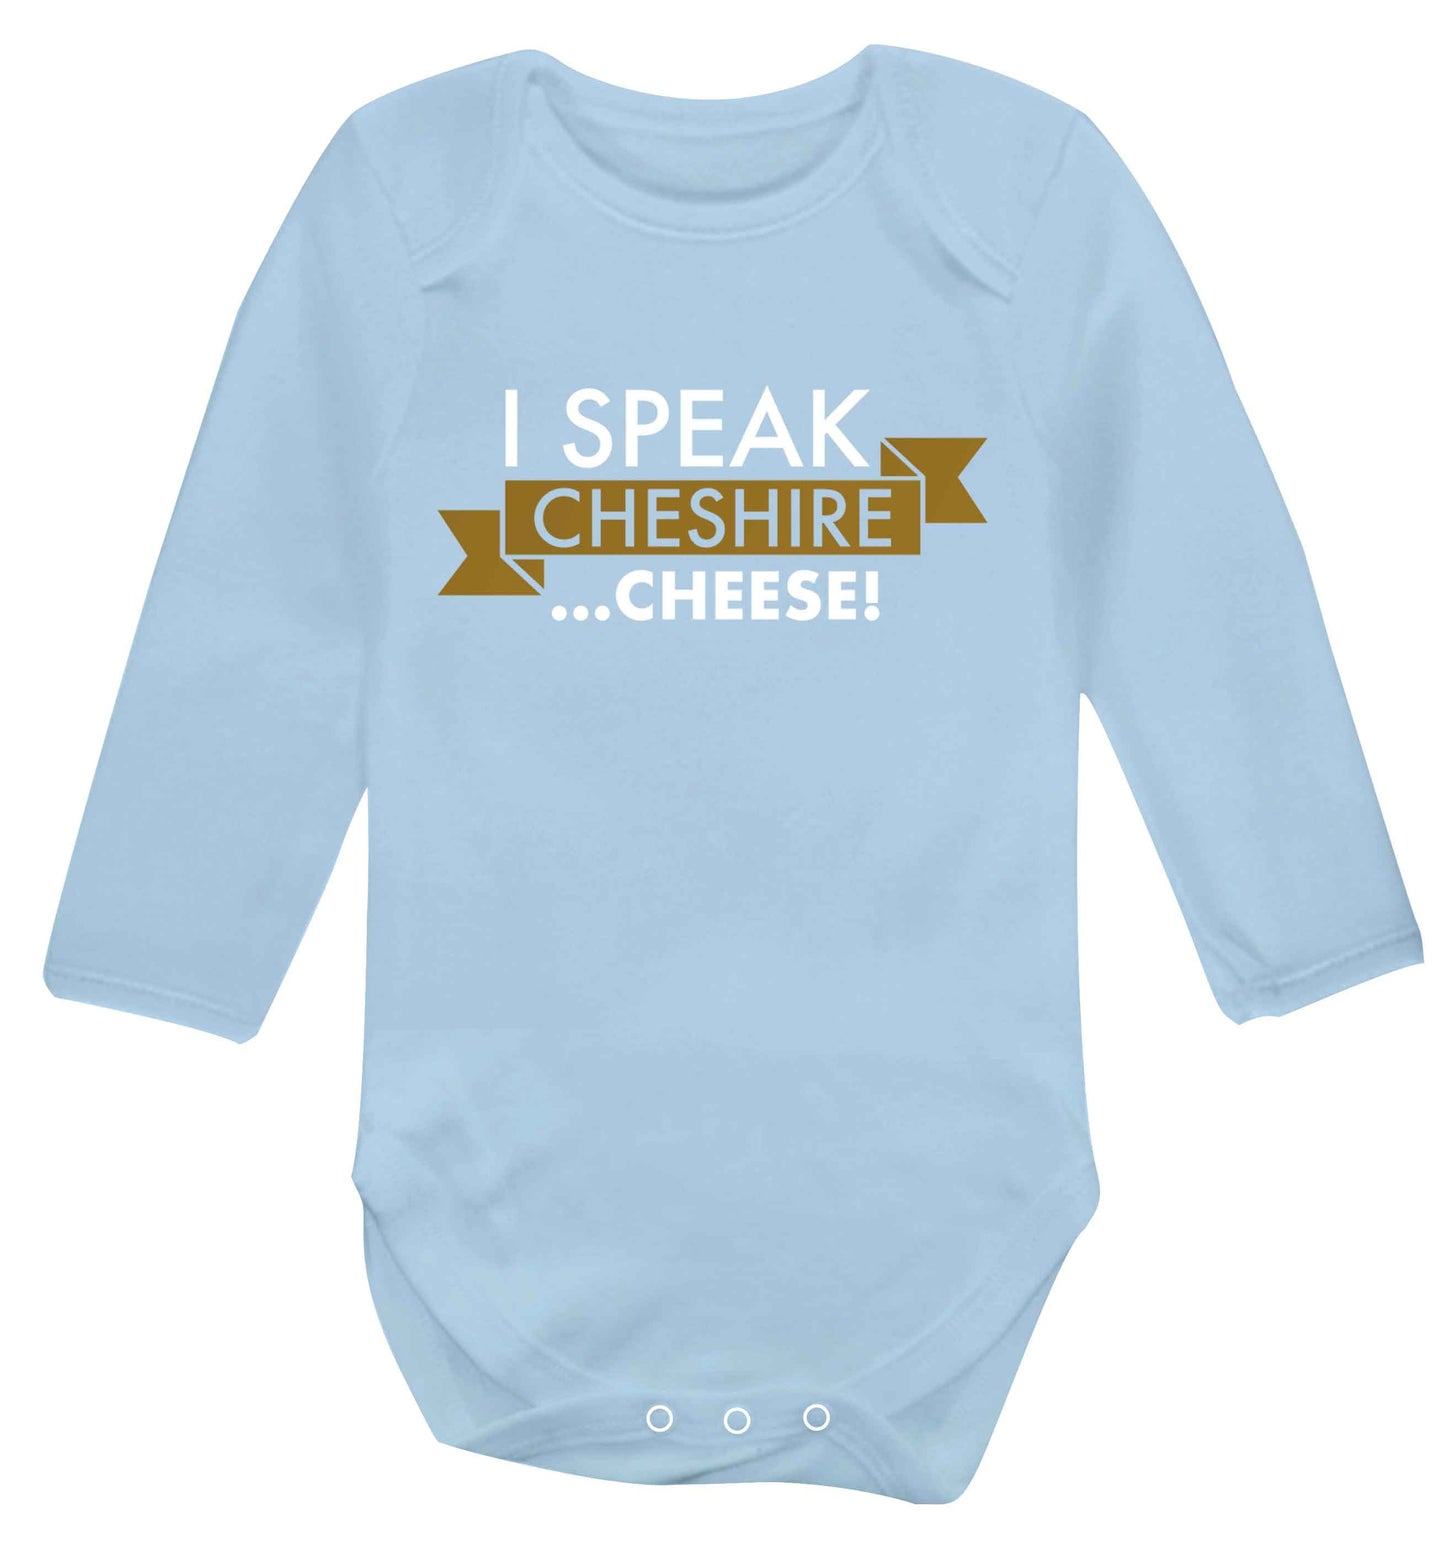 I speak Cheshire cheese Baby Vest long sleeved pale blue 6-12 months